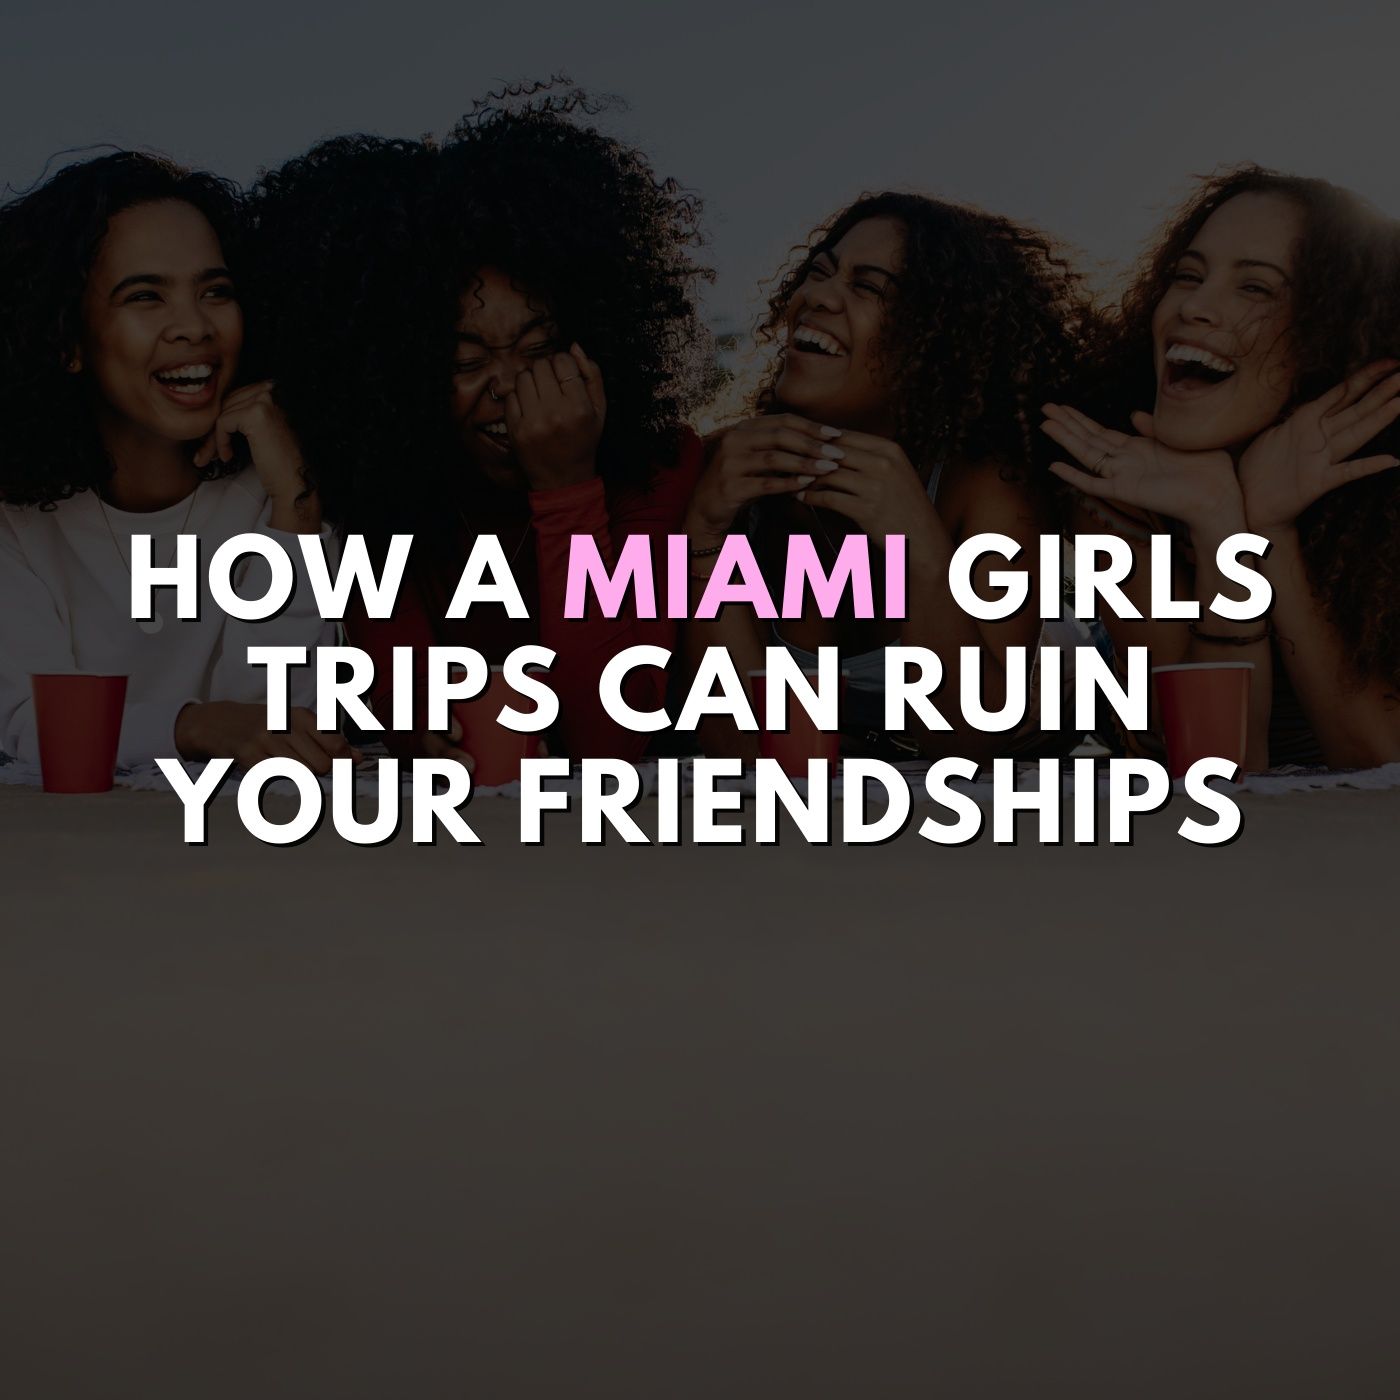 How a Miami Girls Trip can ruin your friendships